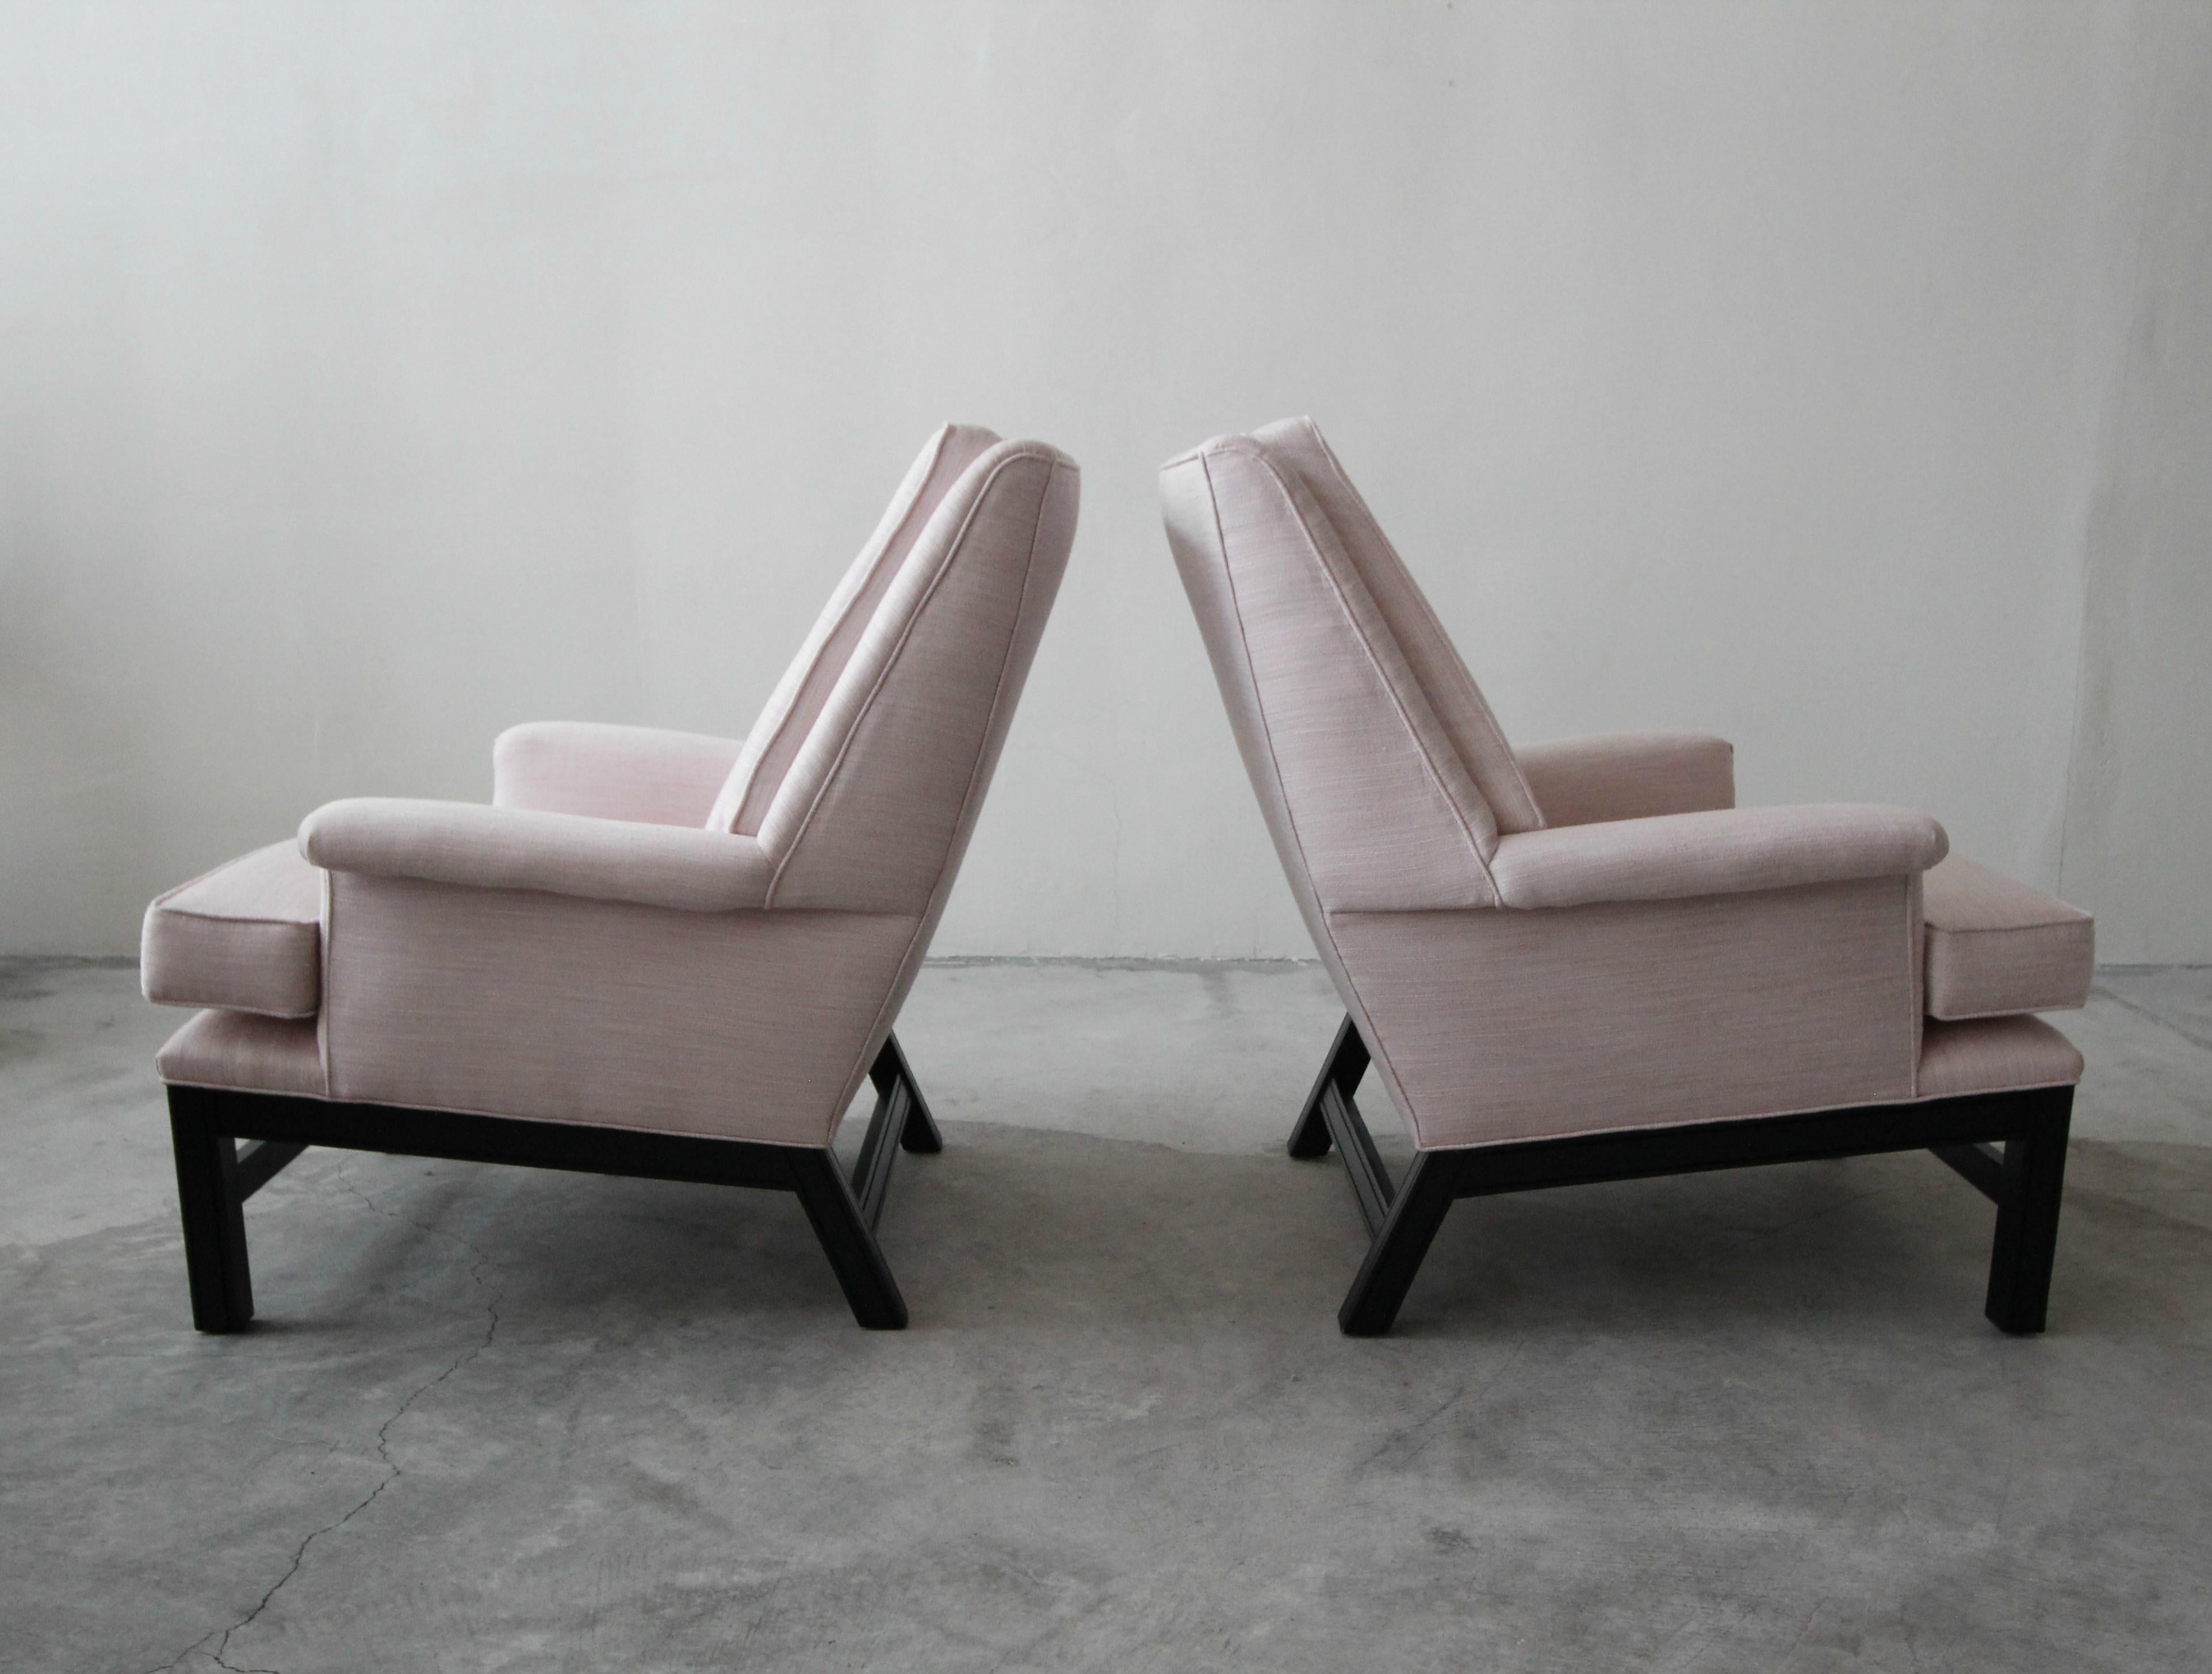 Wood Large Pair of Mid-Century Modern Lounge Chairs